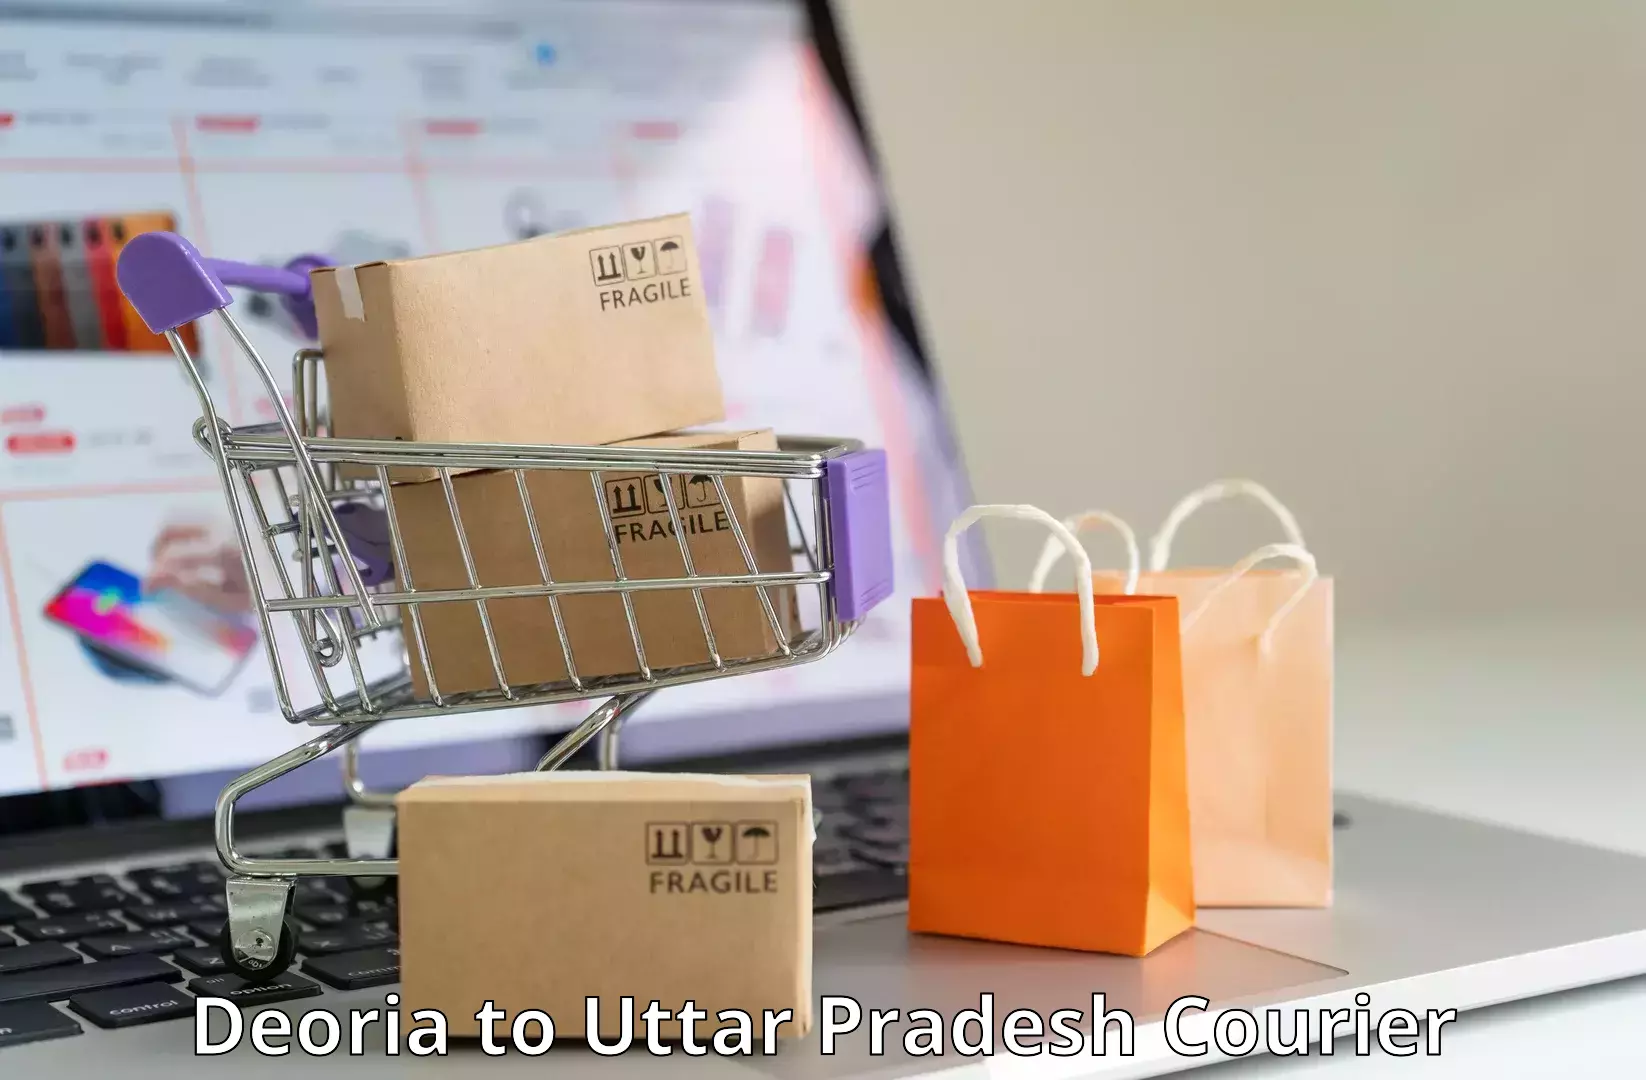 Global shipping networks Deoria to Poonchh